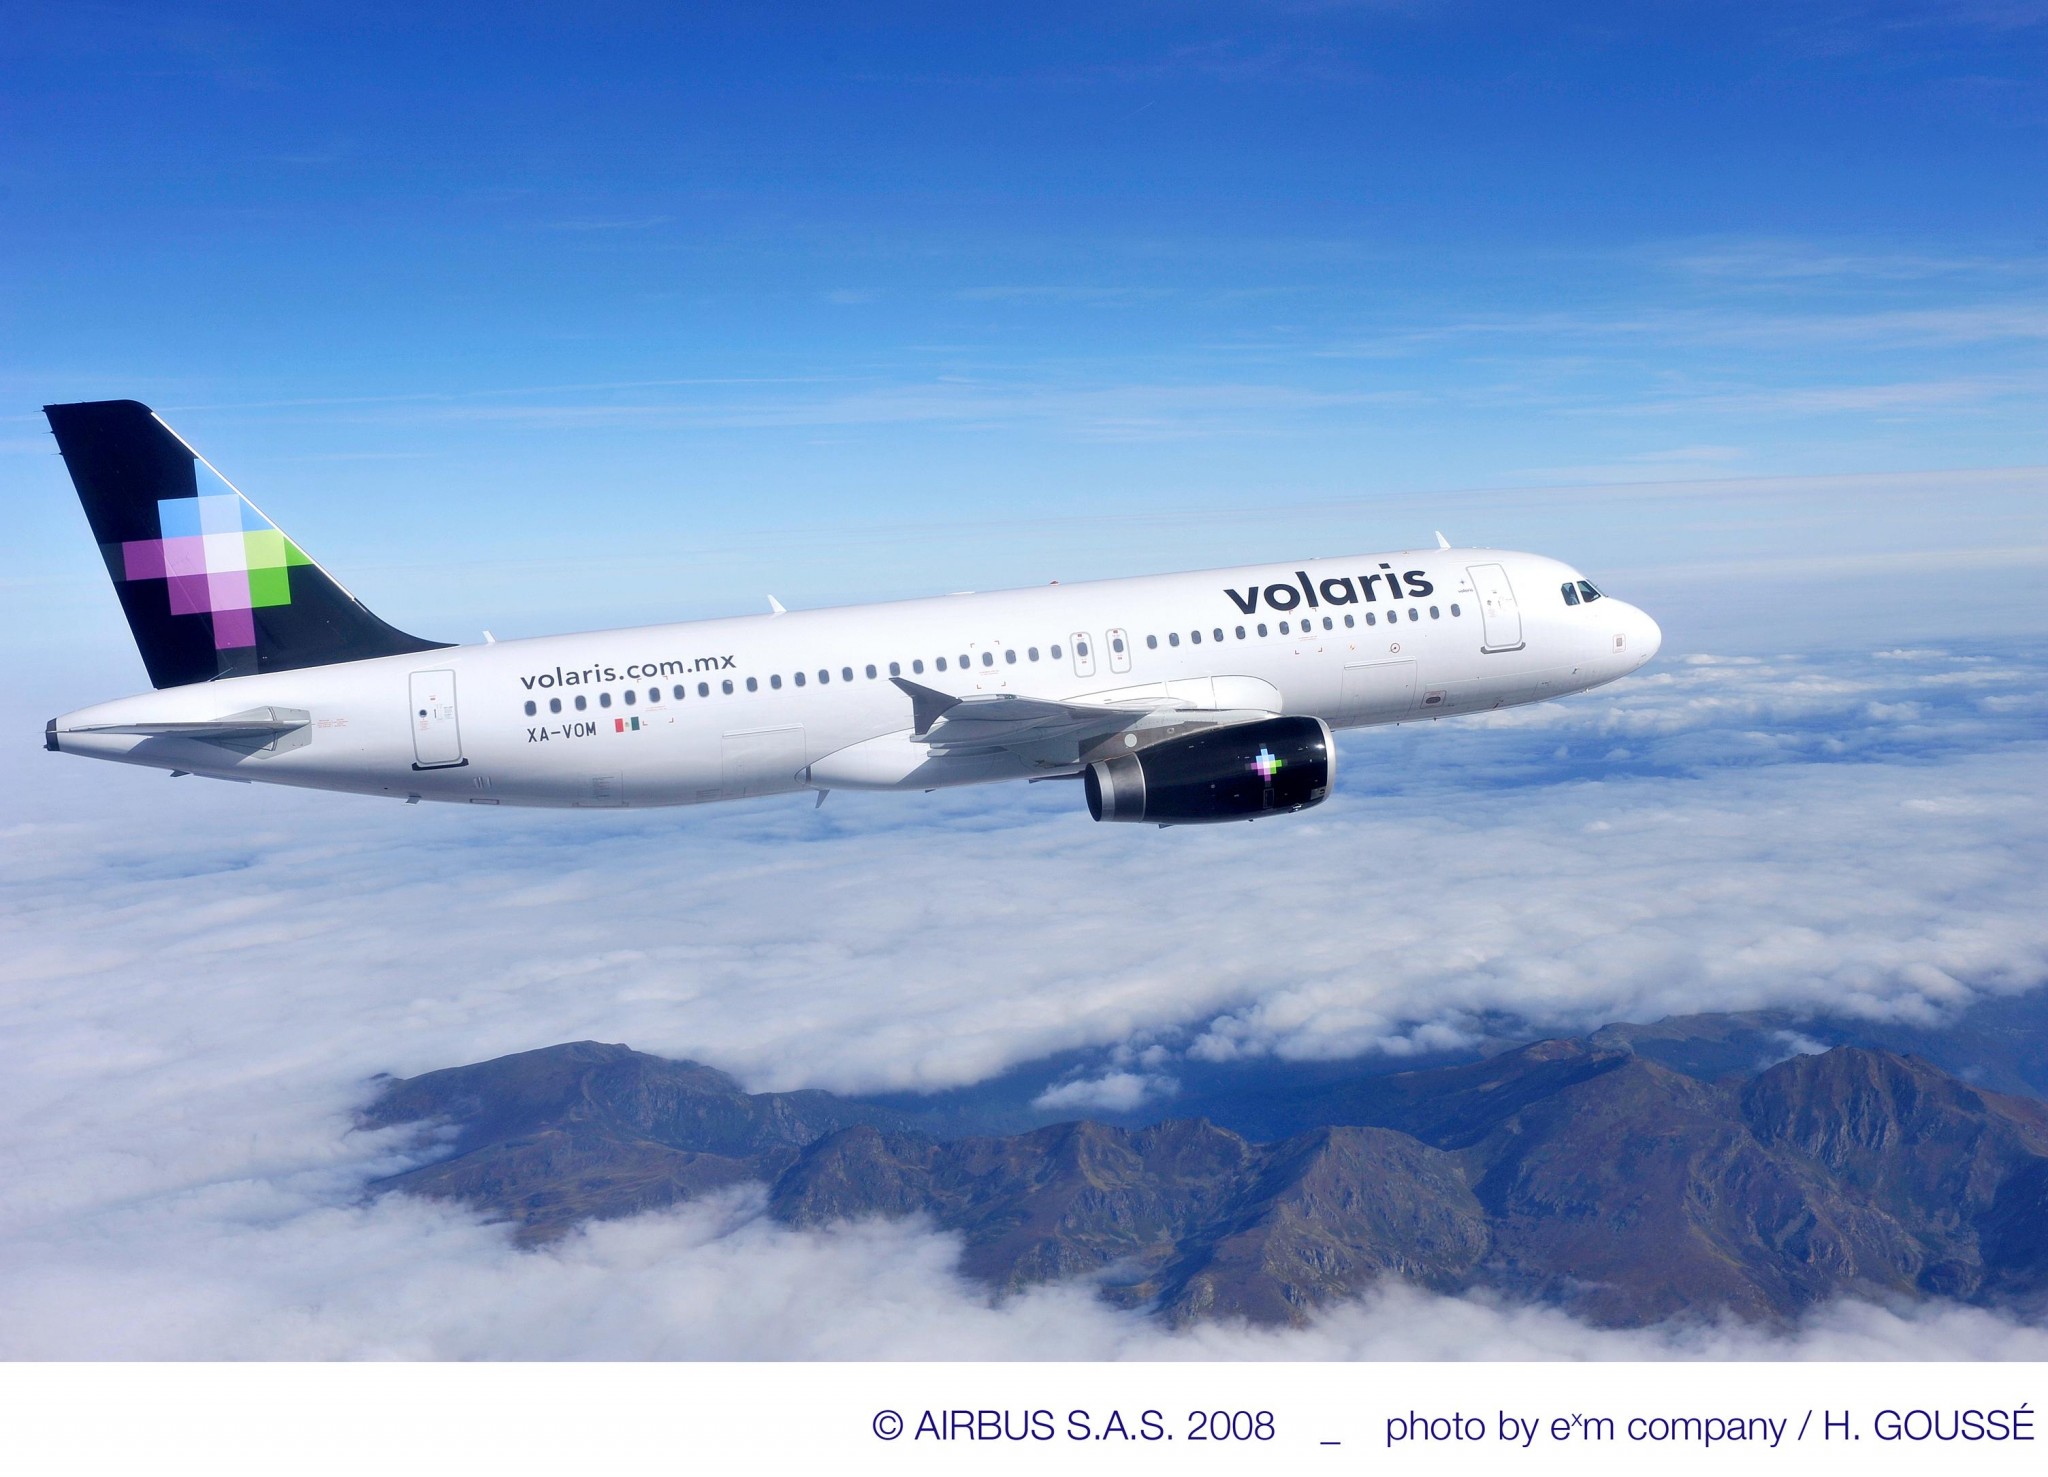 Volaris closes Q3 with a healthy balance sheet showing double-digit growth